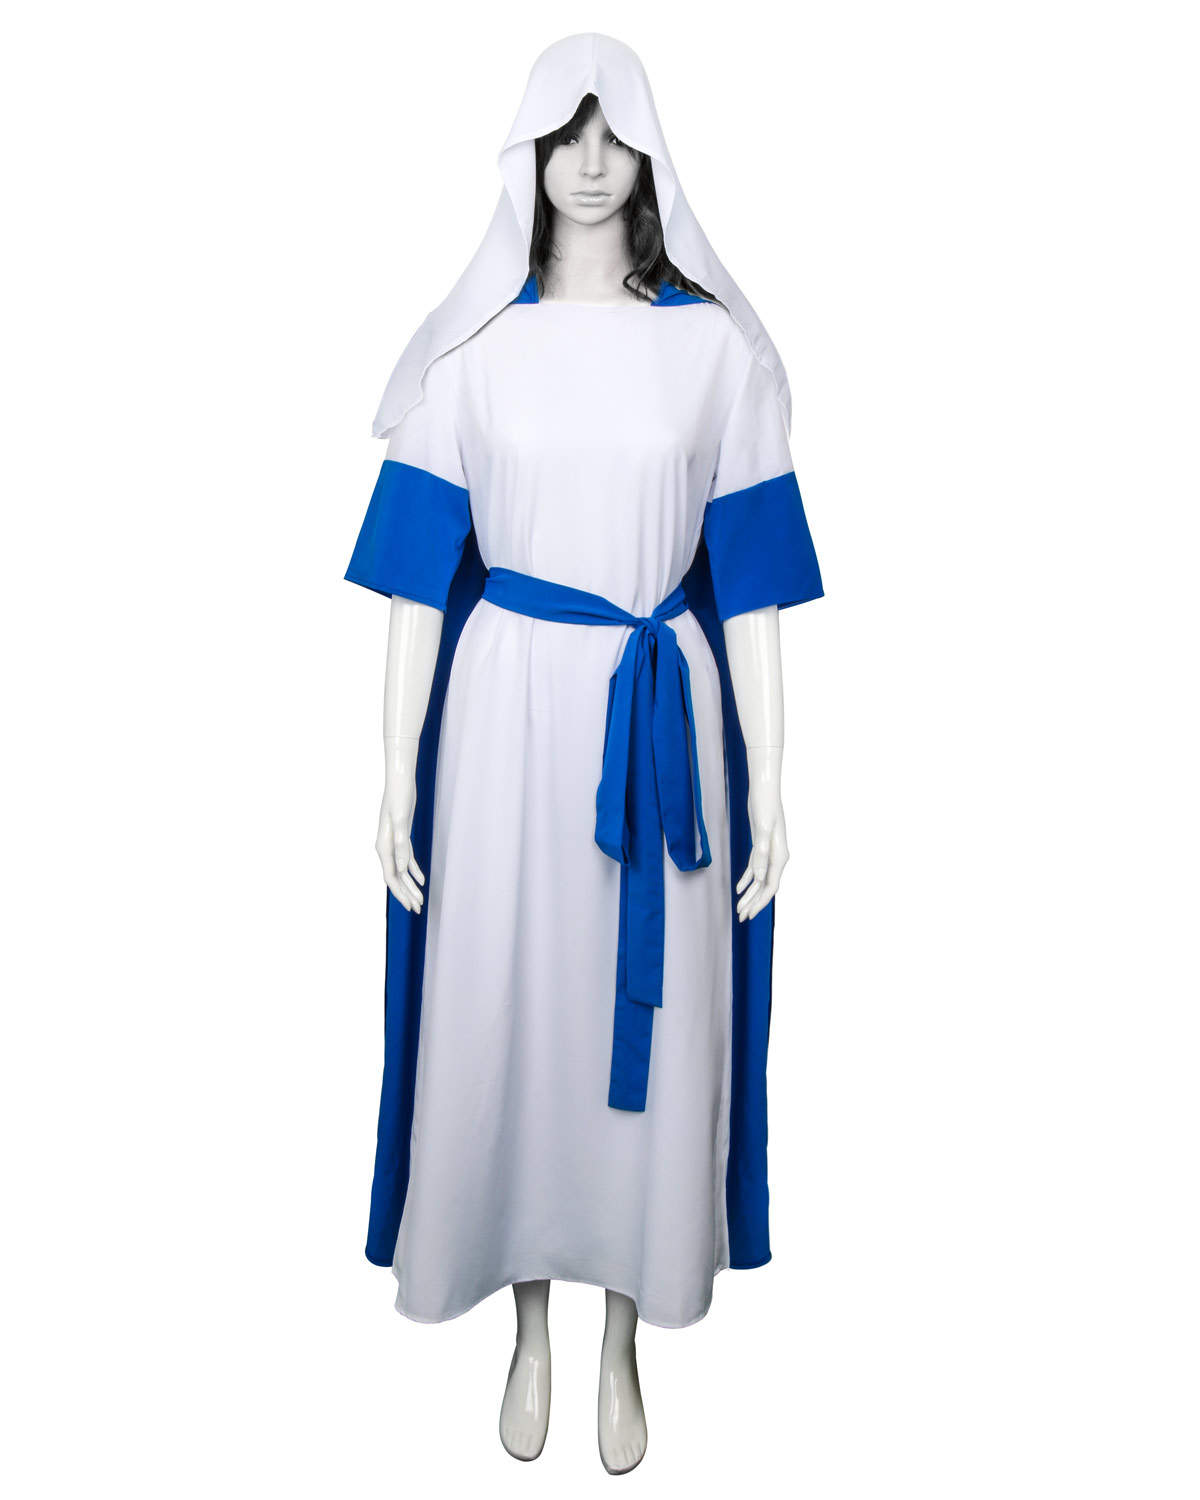 Virgin Mary Cosplay Dress and Cloak The Madonna Costume